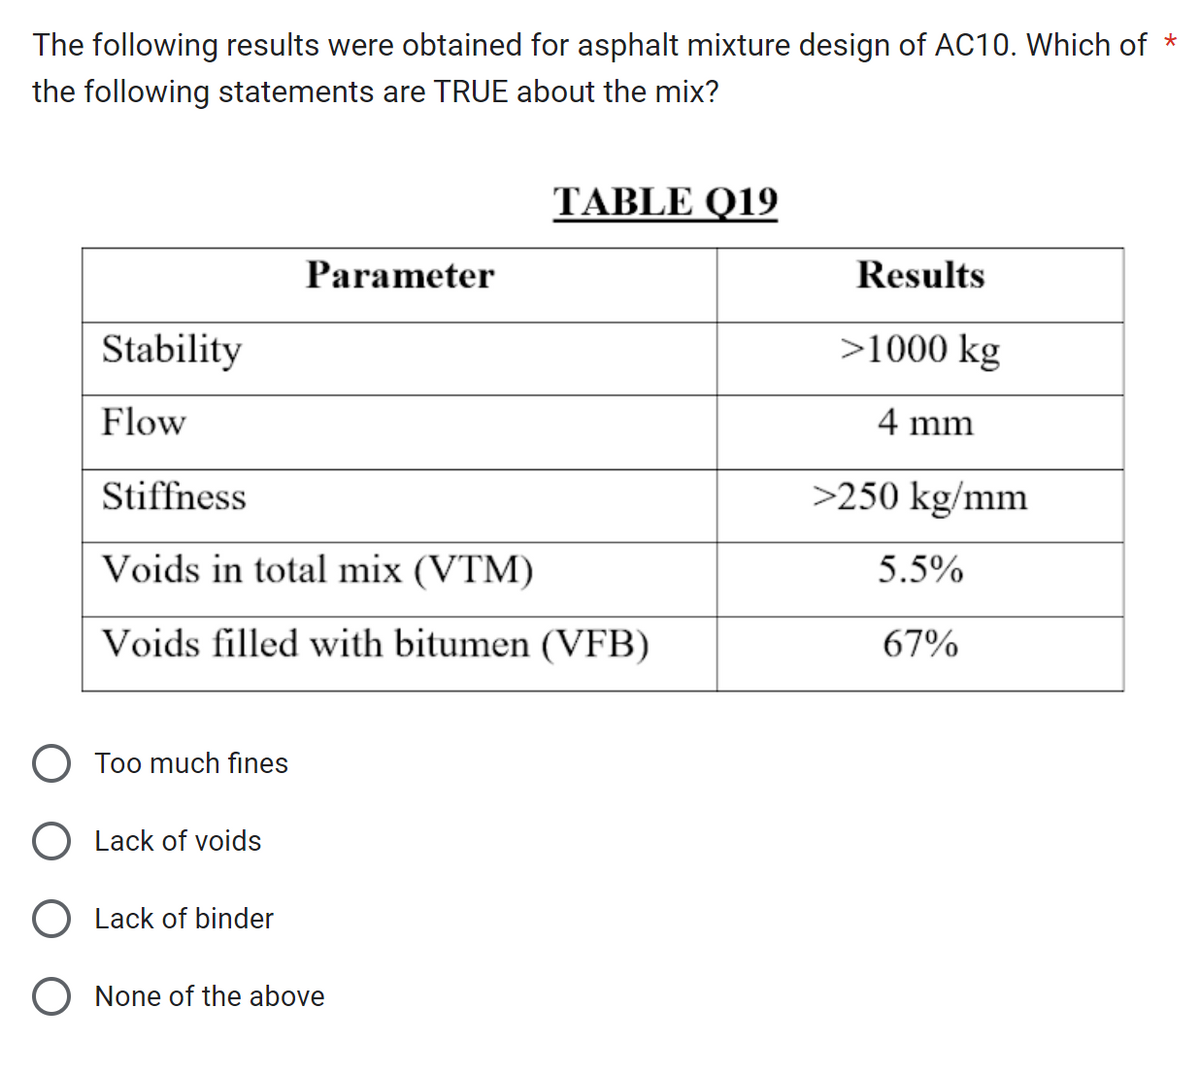 The following results were obtained for asphalt mixture design of AC10. Which of *
the following statements are TRUE about the mix?
Stability
Flow
Parameter
Too much fines
Stiffness
Voids in total mix (VTM)
Voids filled with bitumen (VFB)
TABLE Q19
O Lack of voids
O Lack of binder
O None of the above
Results
>1000 kg
4 mm
>250 kg/mm
5.5%
67%